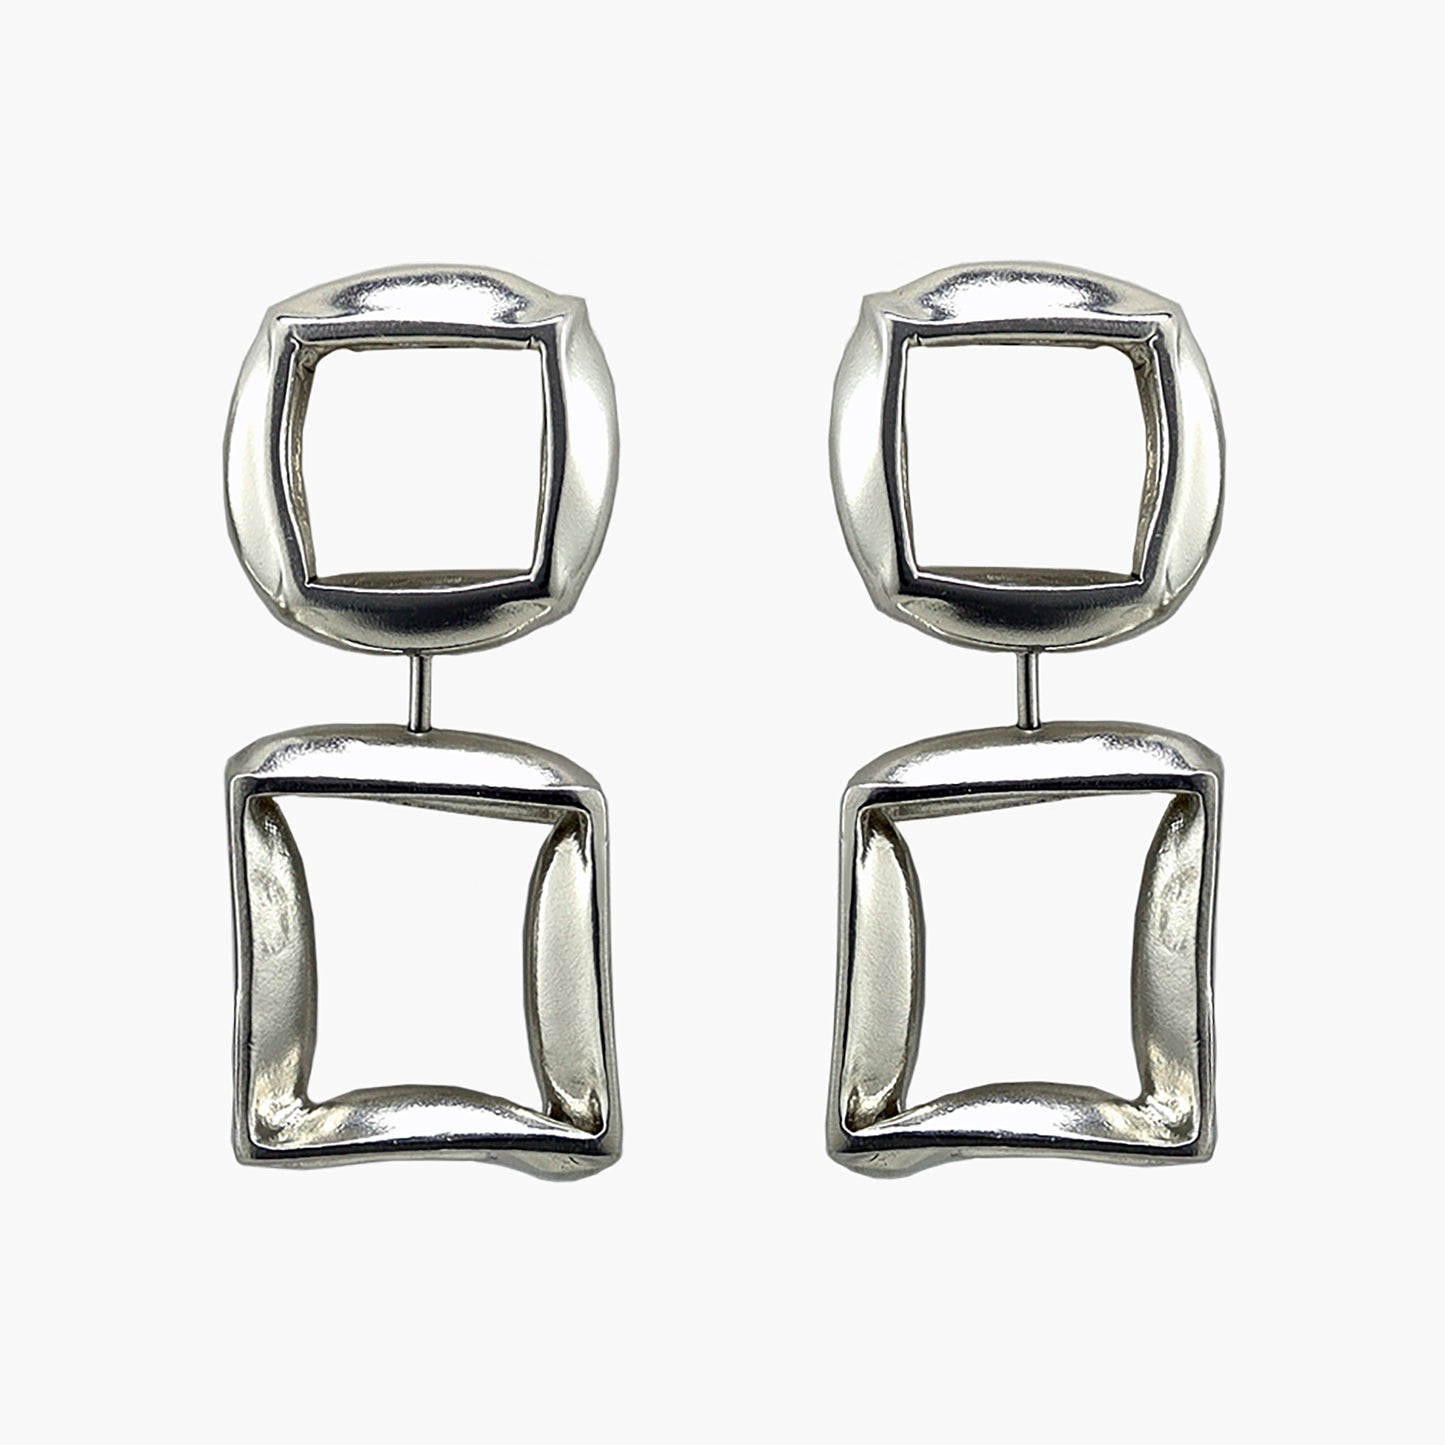 Sterling silver RAFO earrings by Kim Paquet